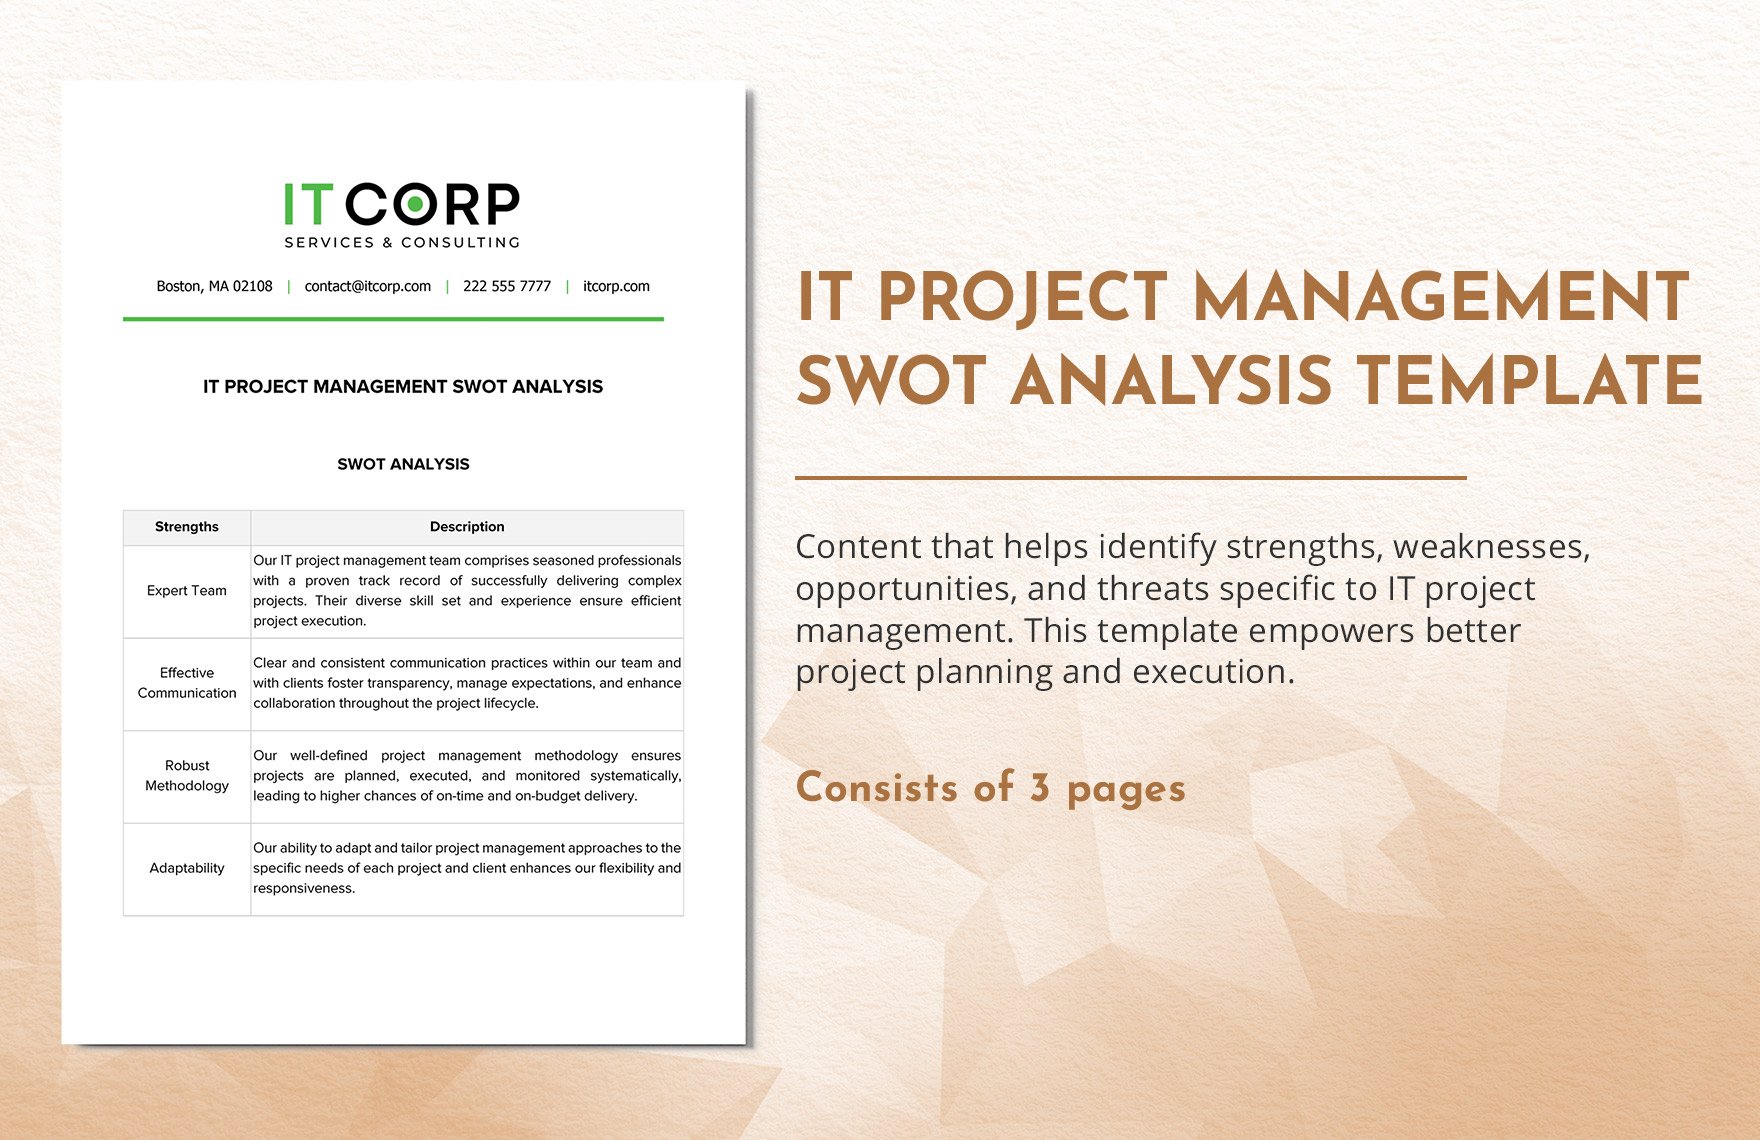 IT Project Management SWOT Analysis Template